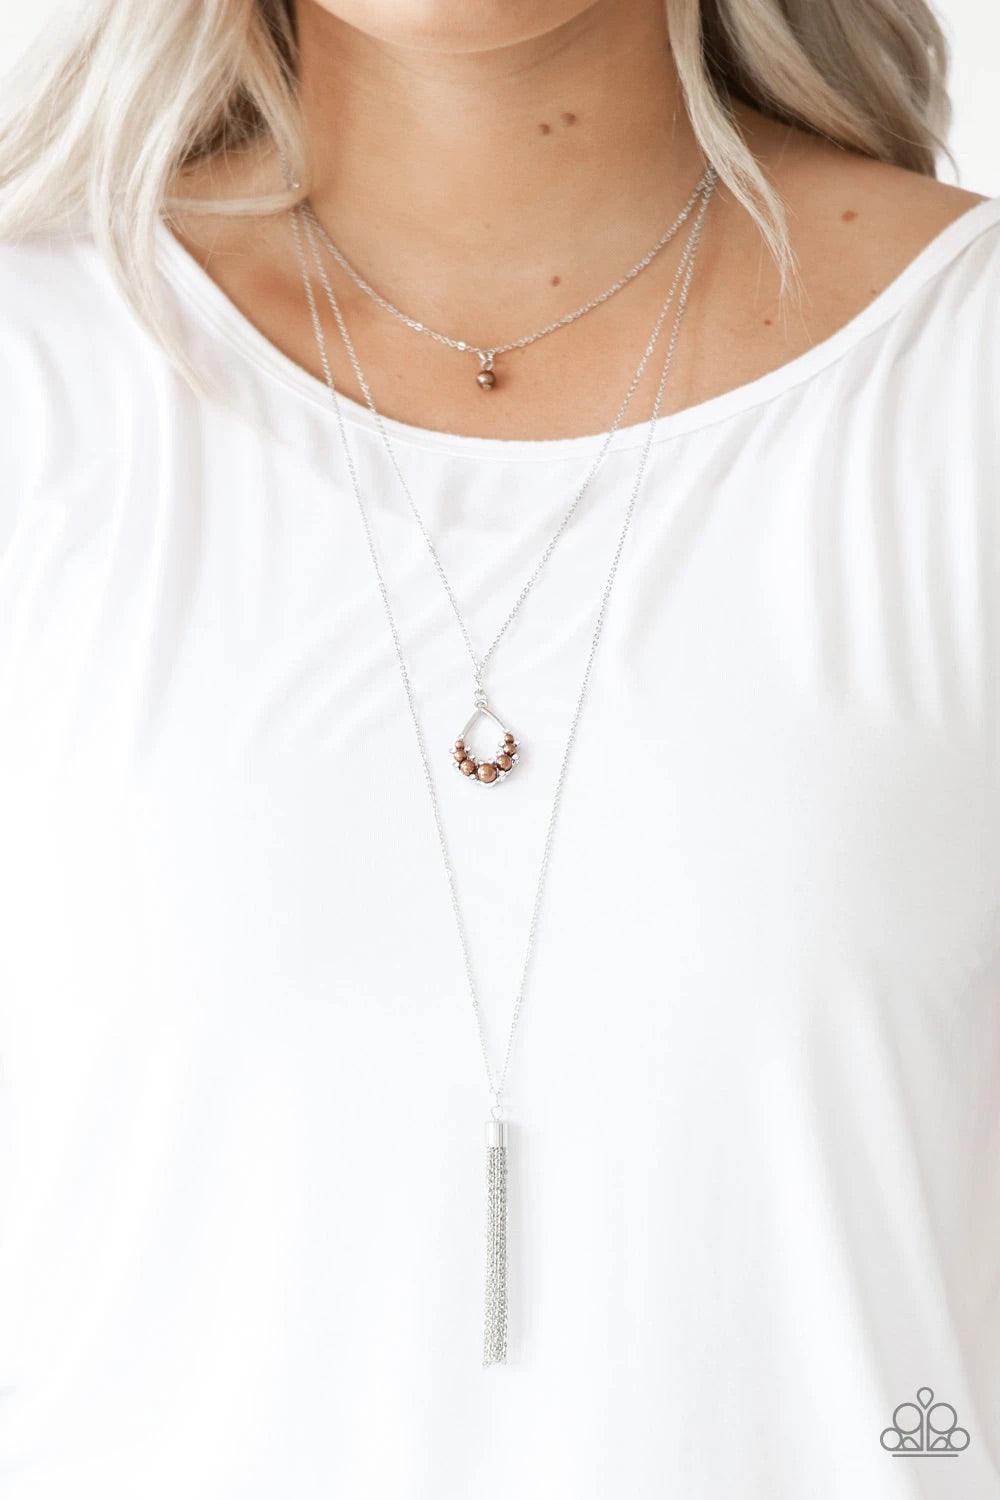 Paparazzi Accessories Be Fancy - Brown A solitaire brown pearl swings from the uppermost chain, giving way to a teardrop pendant and shimmery silver chain tassel. Dainty white rhinestones and brown pearls collect at the bottom of the centermost pendant fo